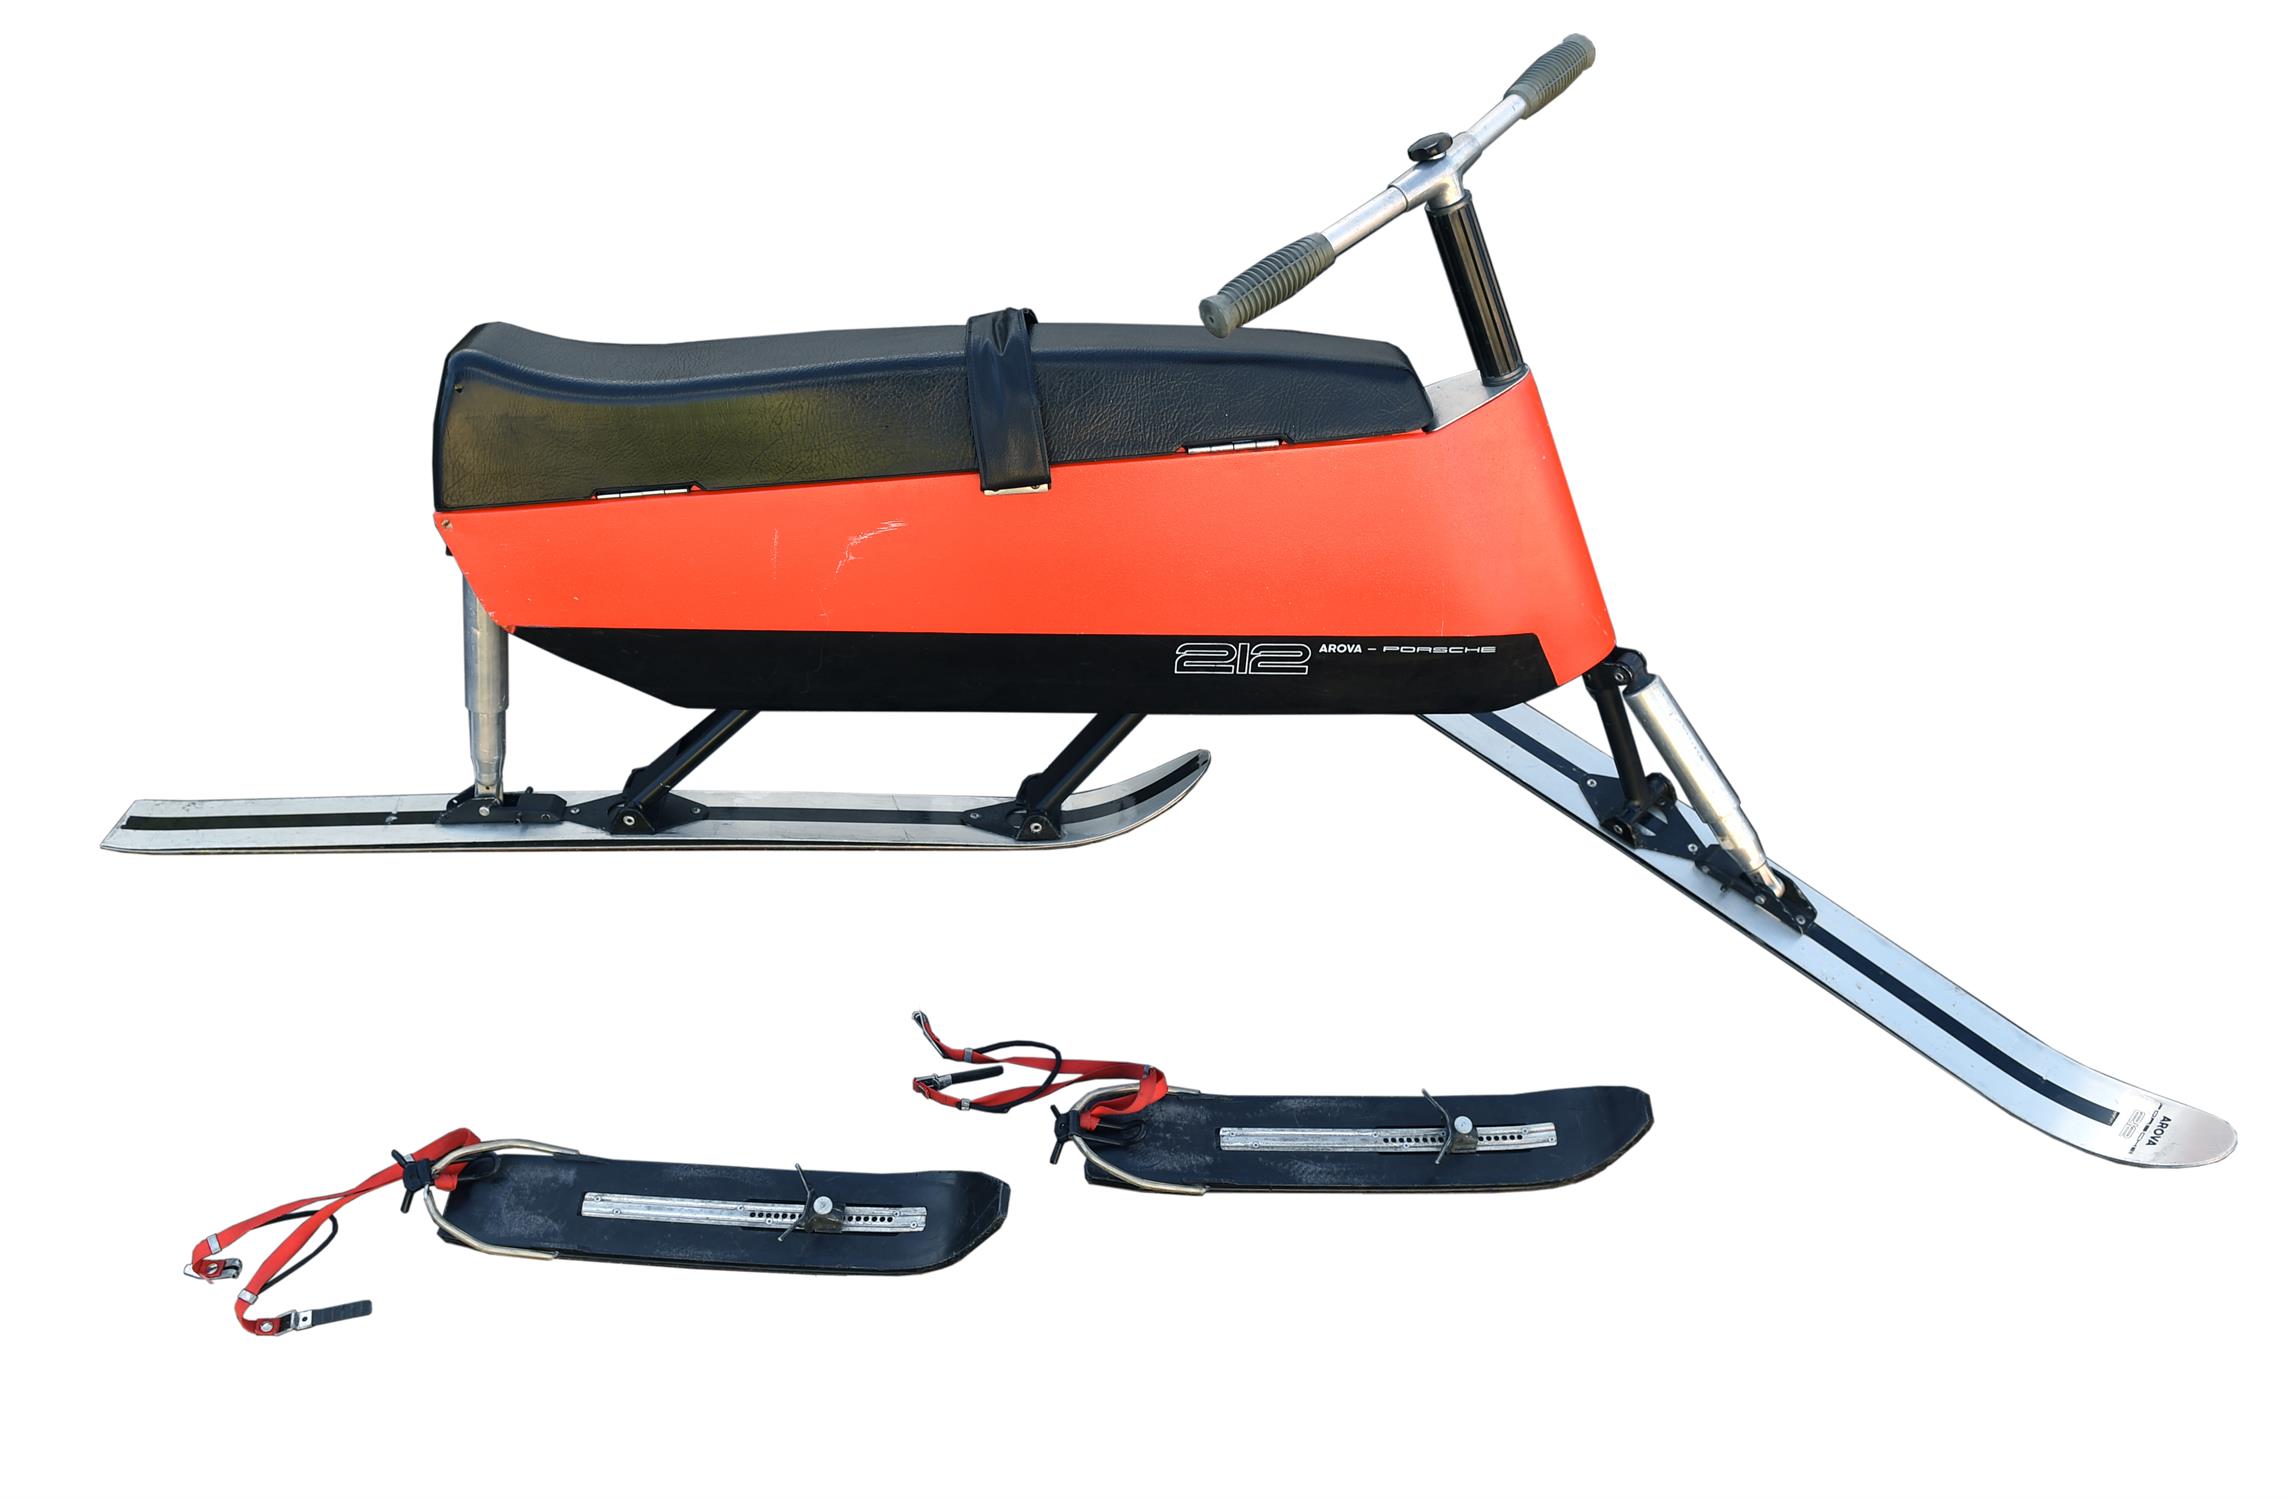 Red Arova-Porsche 212 Skibob - Manufactured in 1970 with the specific dimensions to fit into the